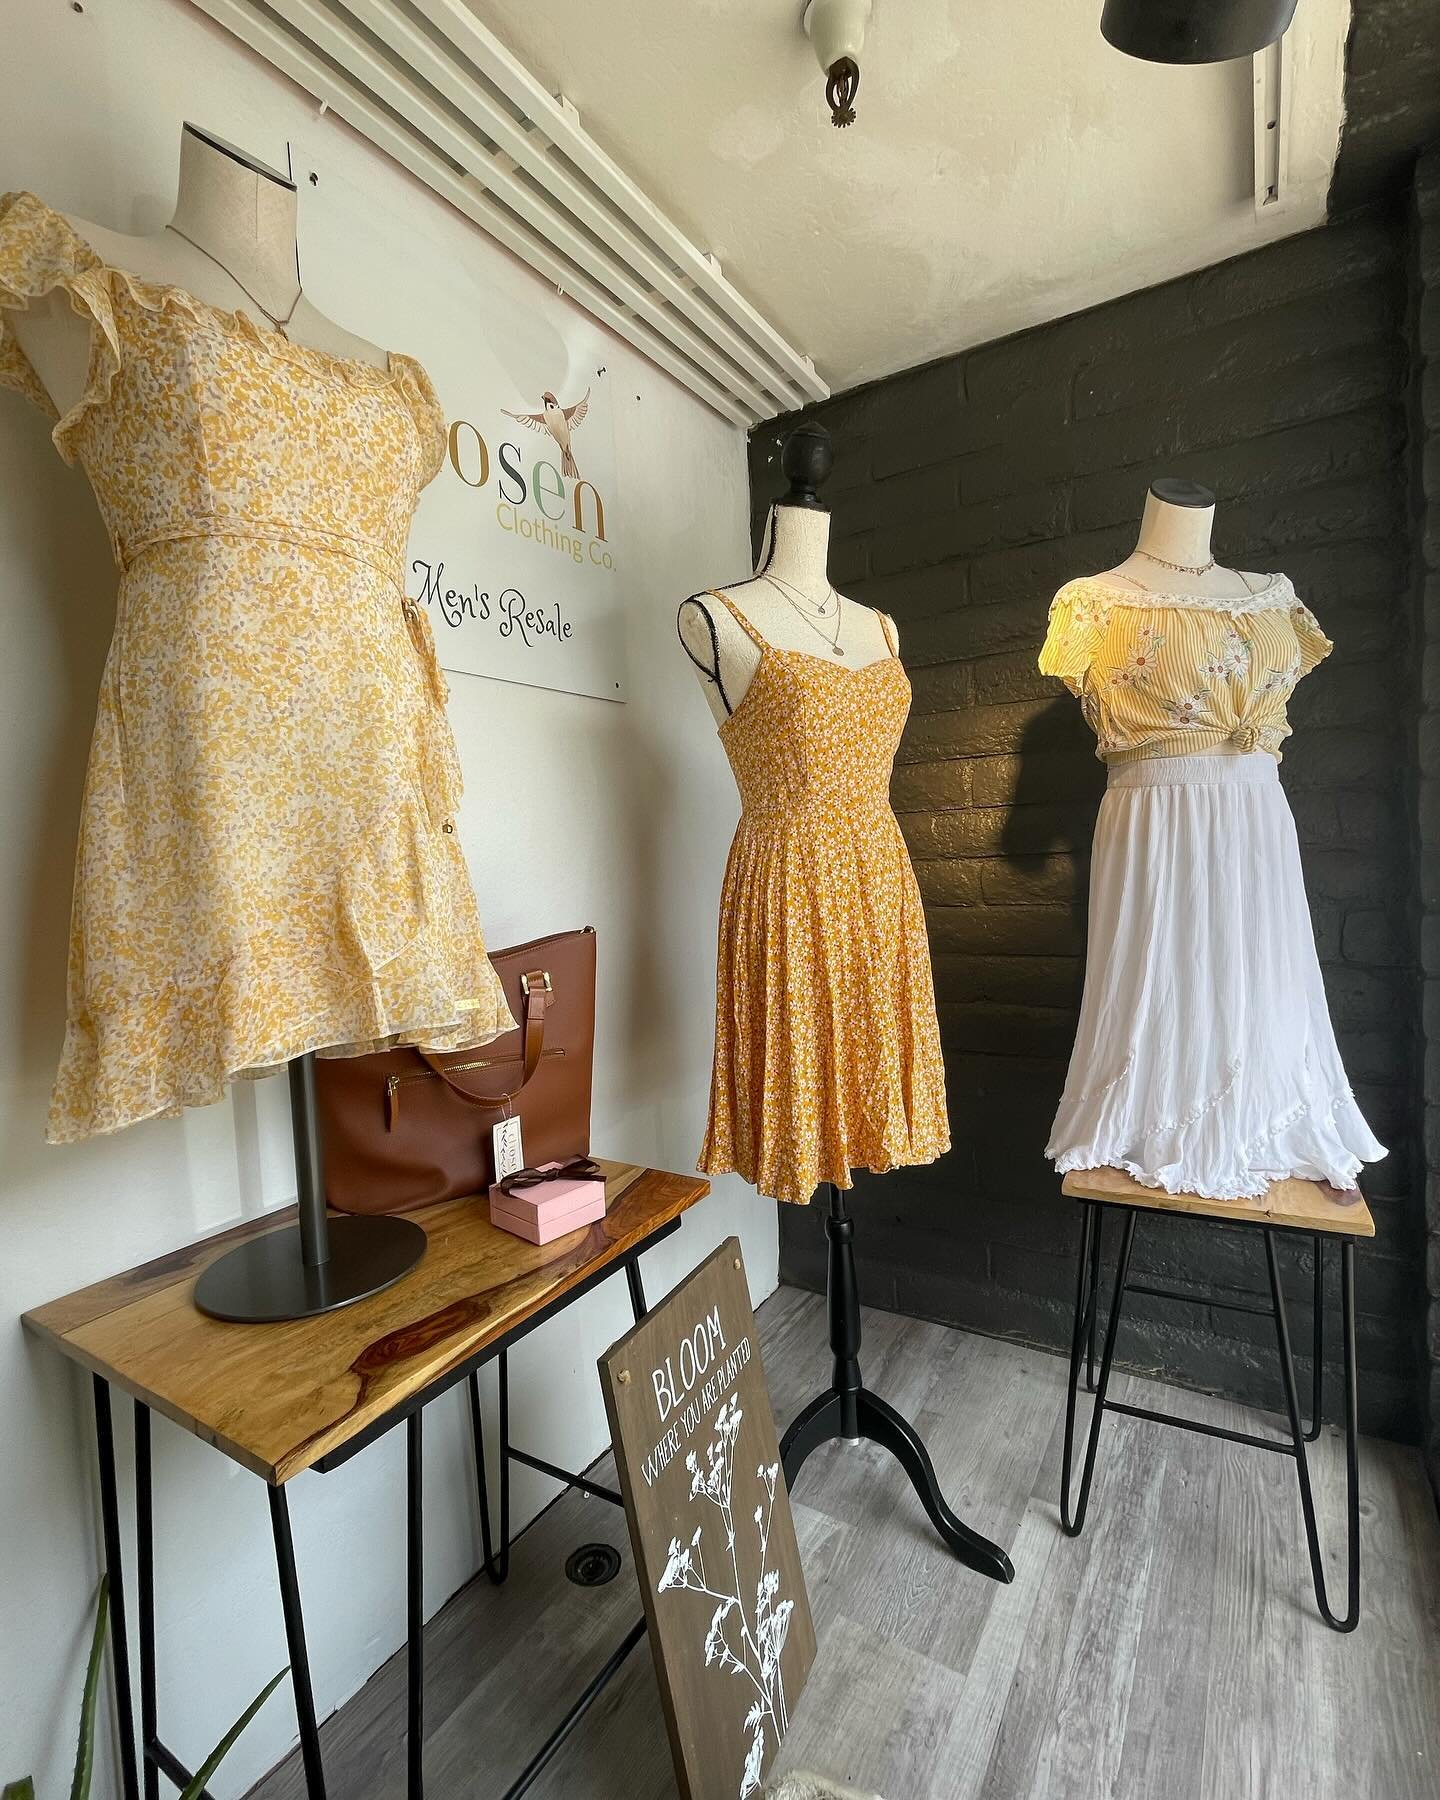 Adorable new summer Dresses!

#smallbusiness #consignment #clothing